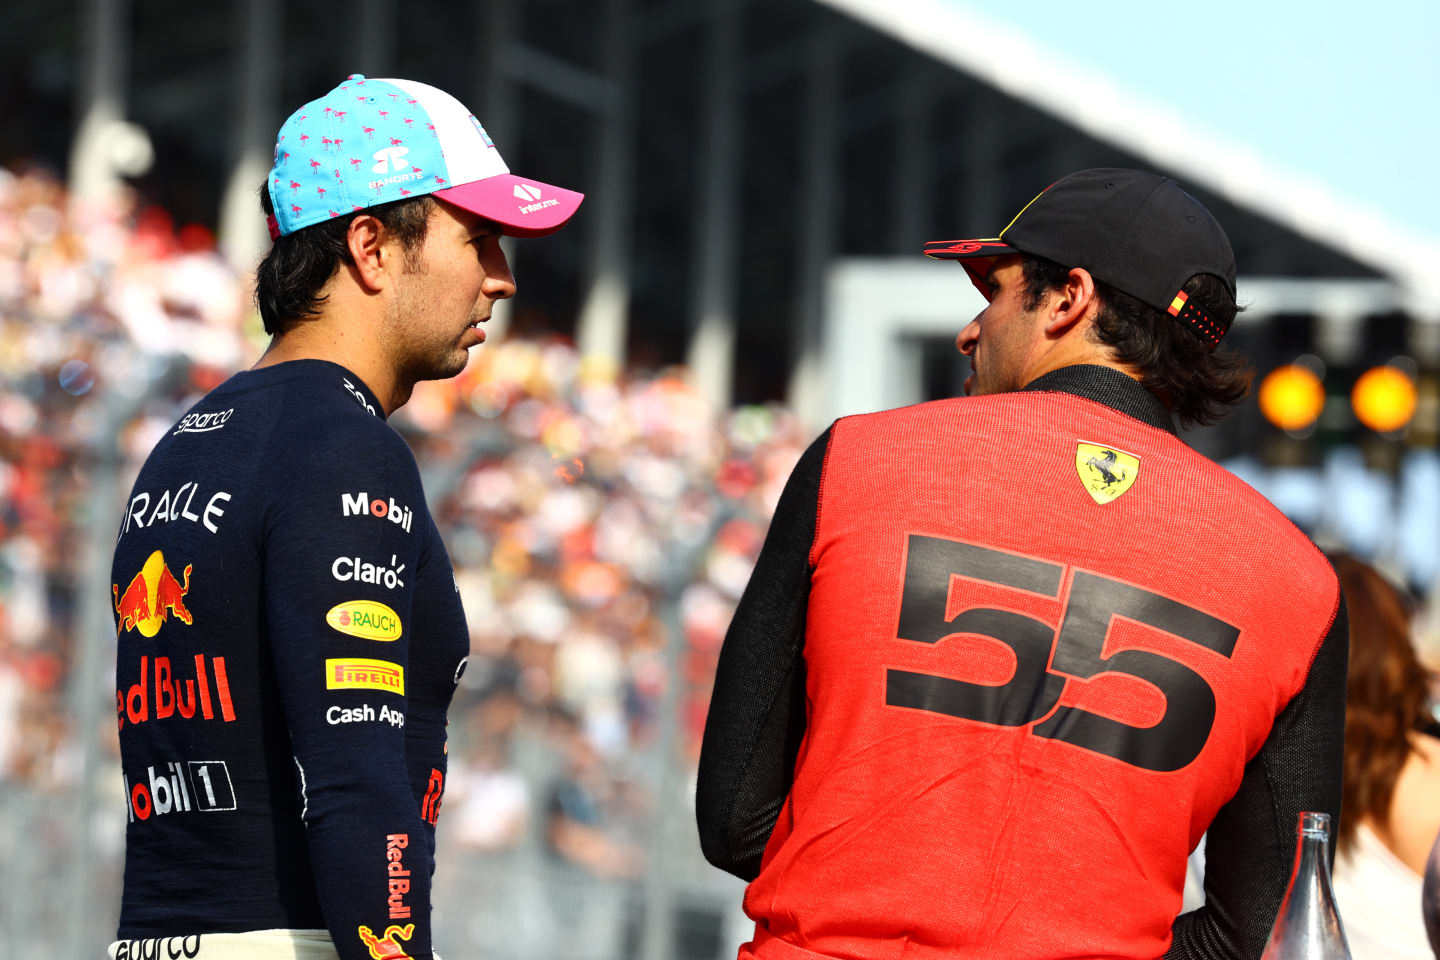 MIAMI, FLORIDA - MAY 06: Pole position qualifier Sergio Perez of Mexico and Oracle Red Bull Racing and Third placed qualifier Carlos Sainz of Spain and Ferrari talk in parc ferme during qualifying ahead of the F1 Grand Prix of Miami at Miami International Autodrome on May 06, 2023 in Miami, Florida. (Photo by Mark Thompson/Getty Images)